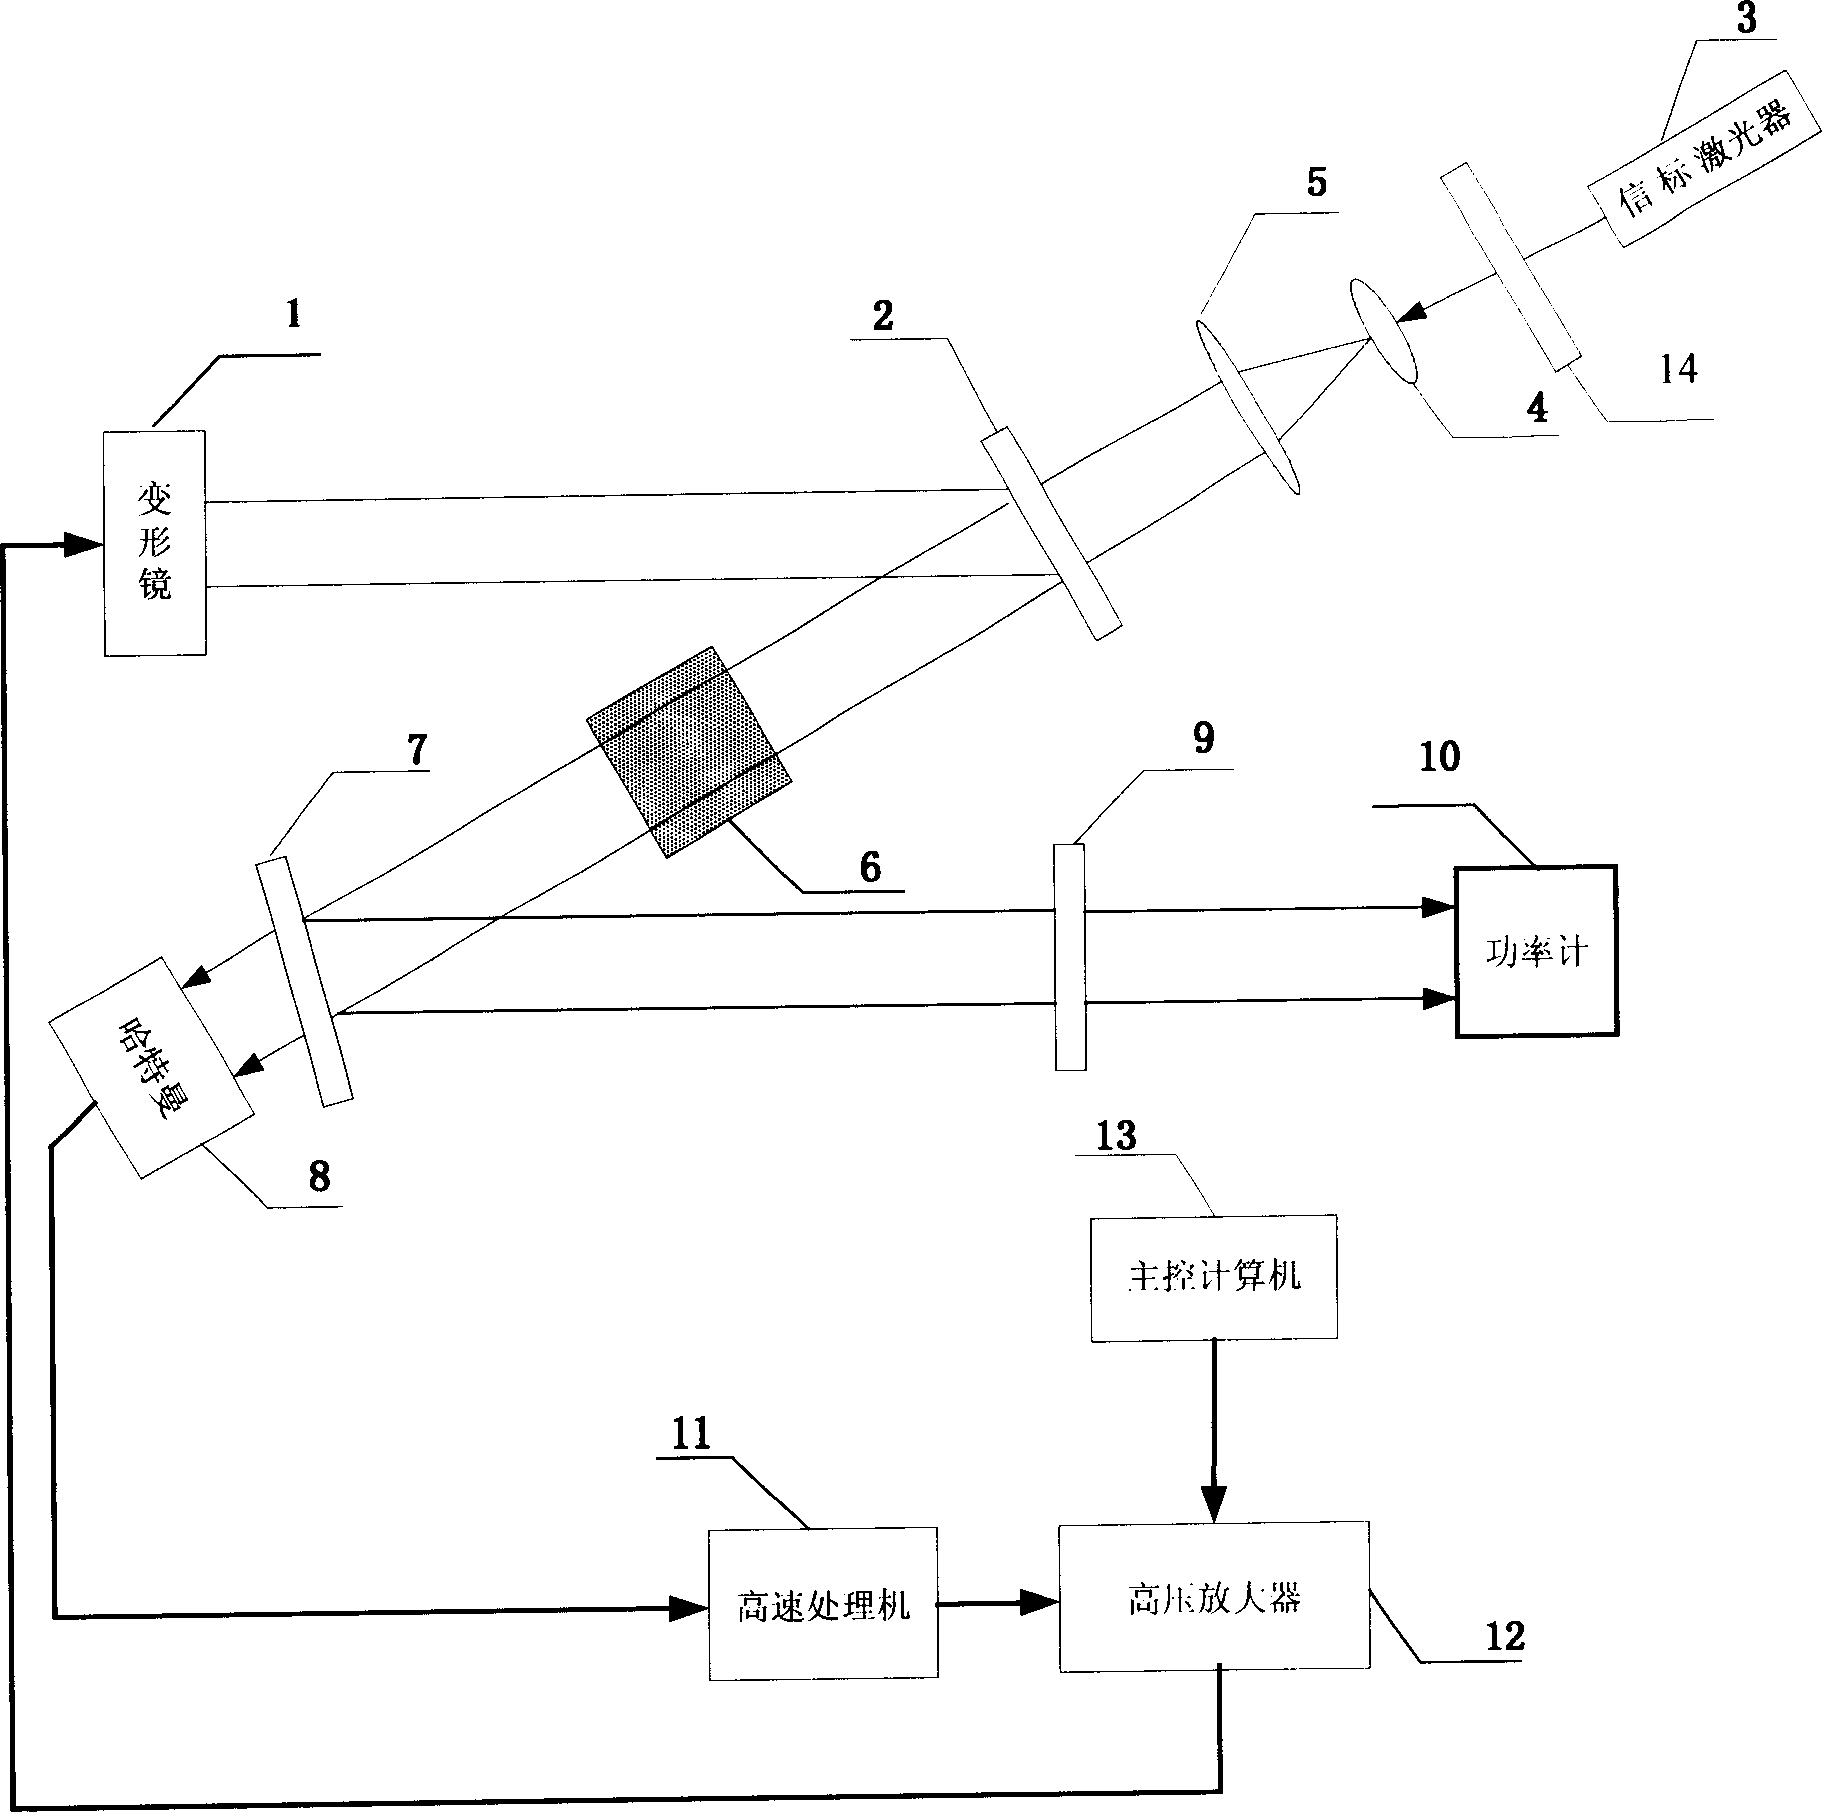 Apparatus for improving light beam quality of solid laser by using in-chamber adaptive optical technology